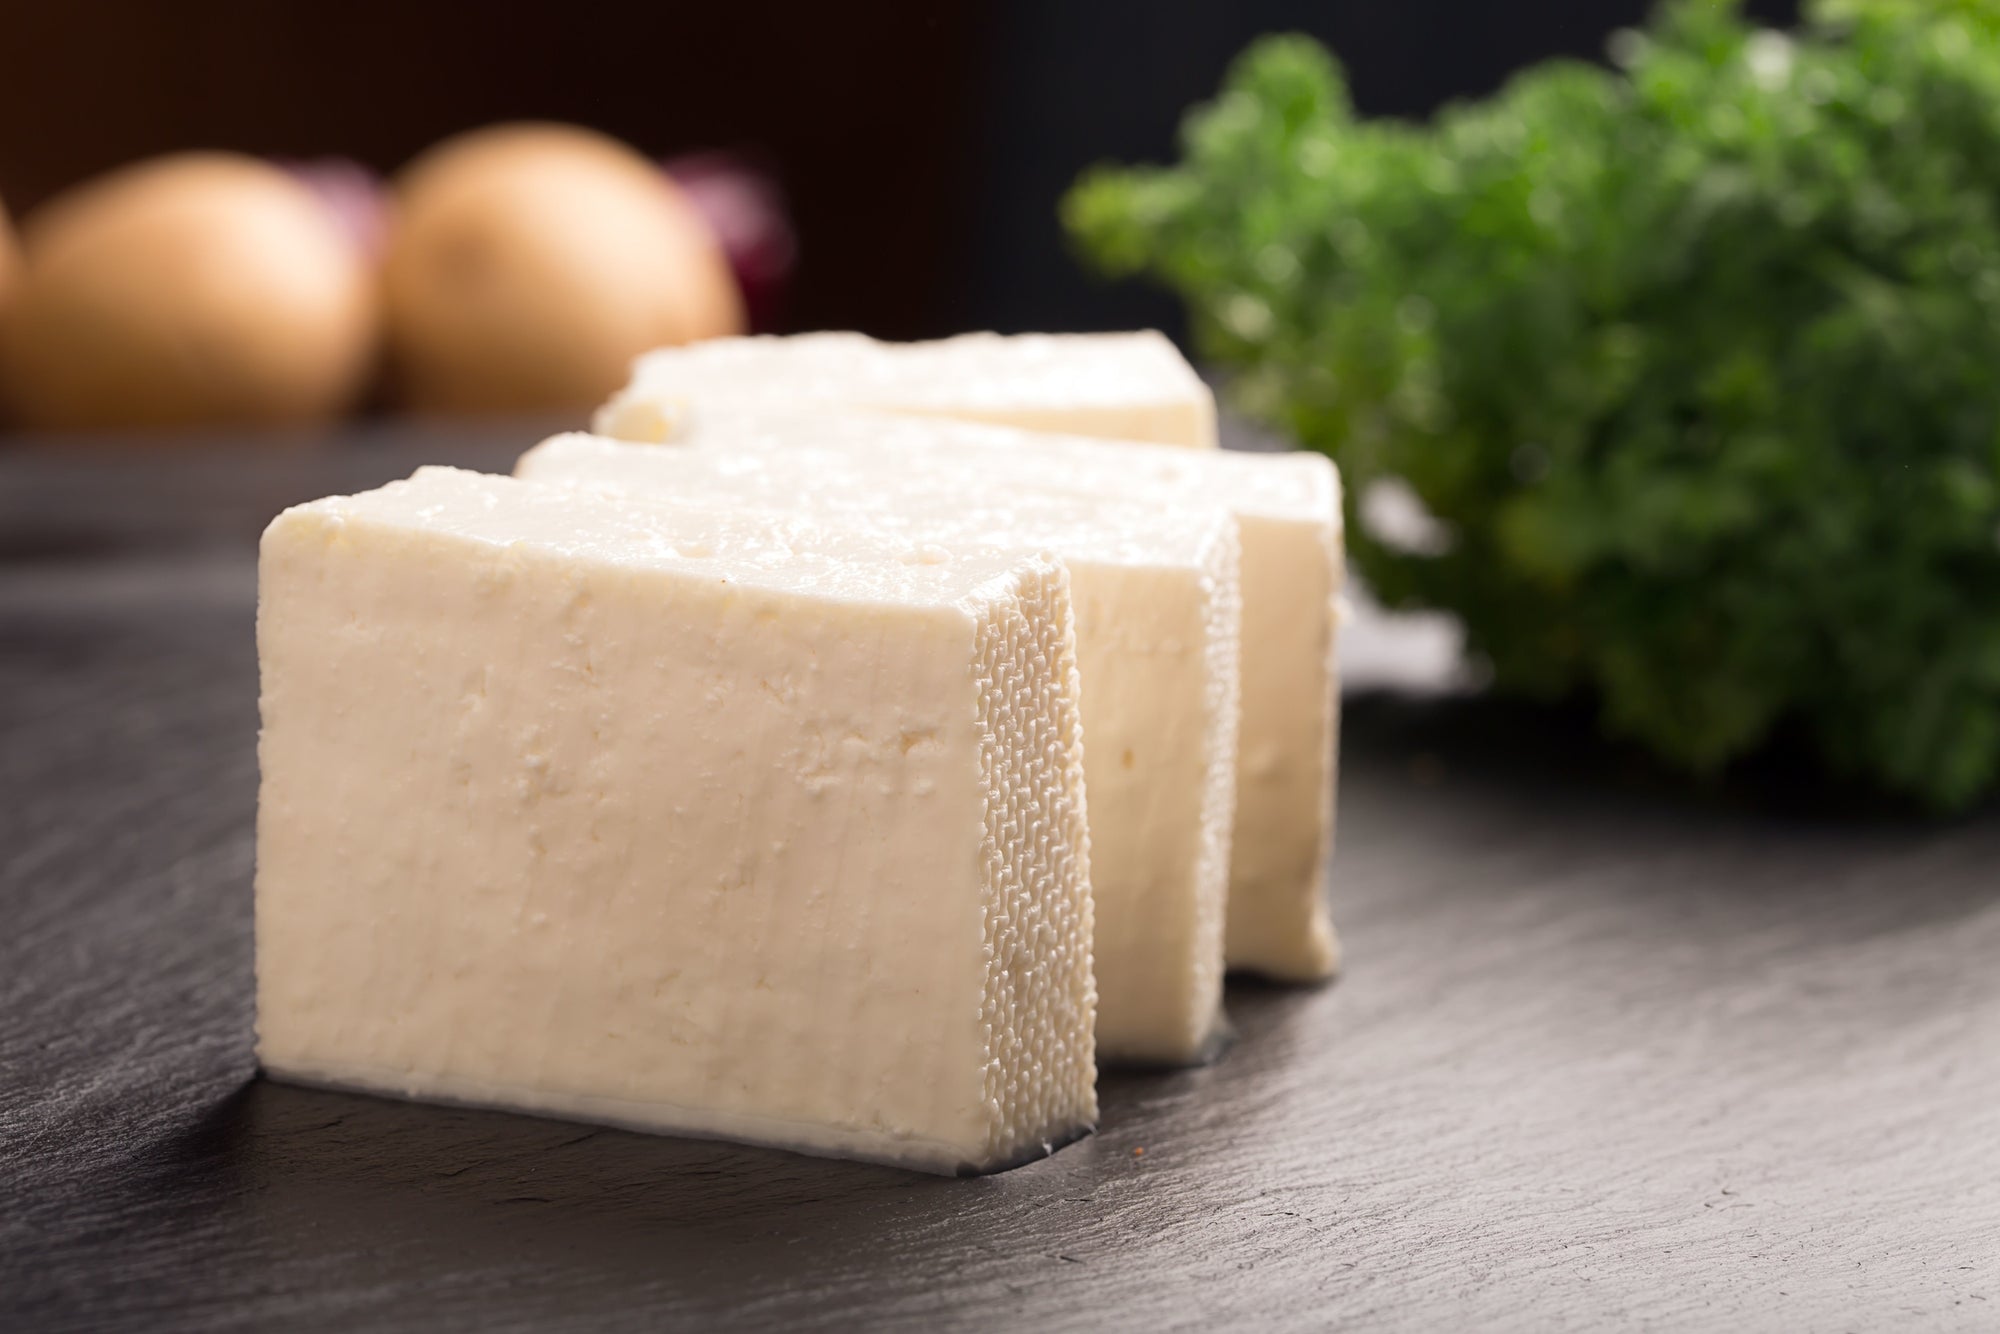 Tofu Vs Paneer - Which is Healthier and Why